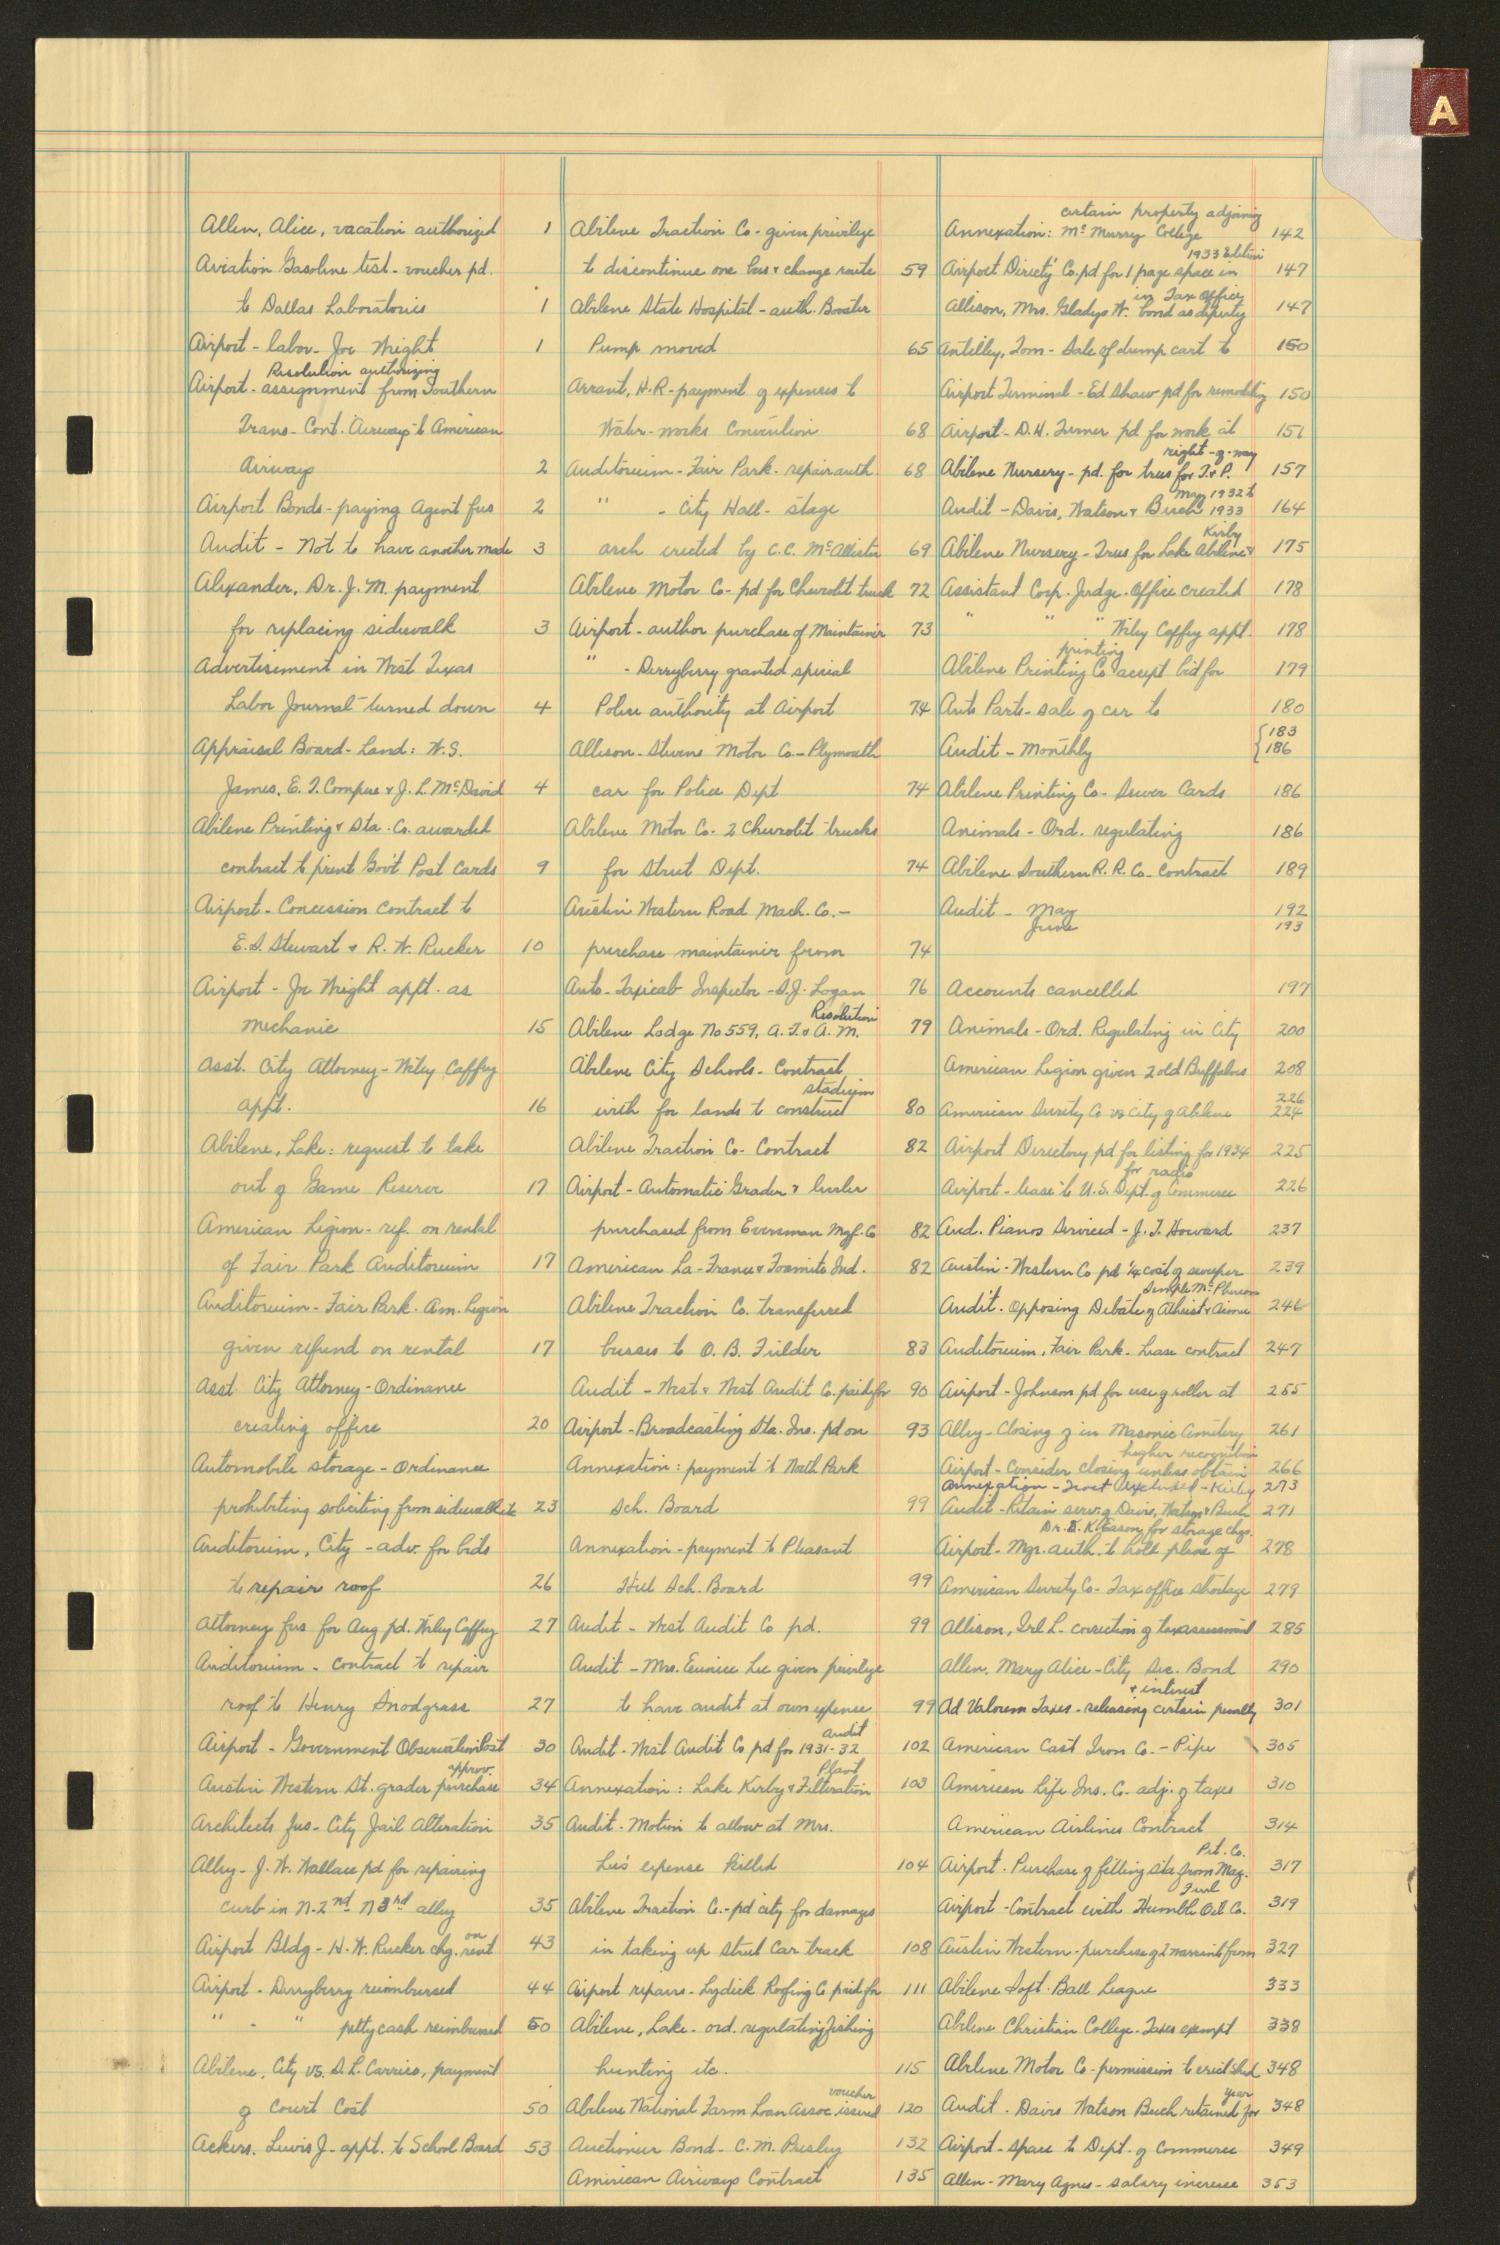 [Abilene Board of Commissioners Minutes: 1931-1938]
                                                
                                                    A
                                                